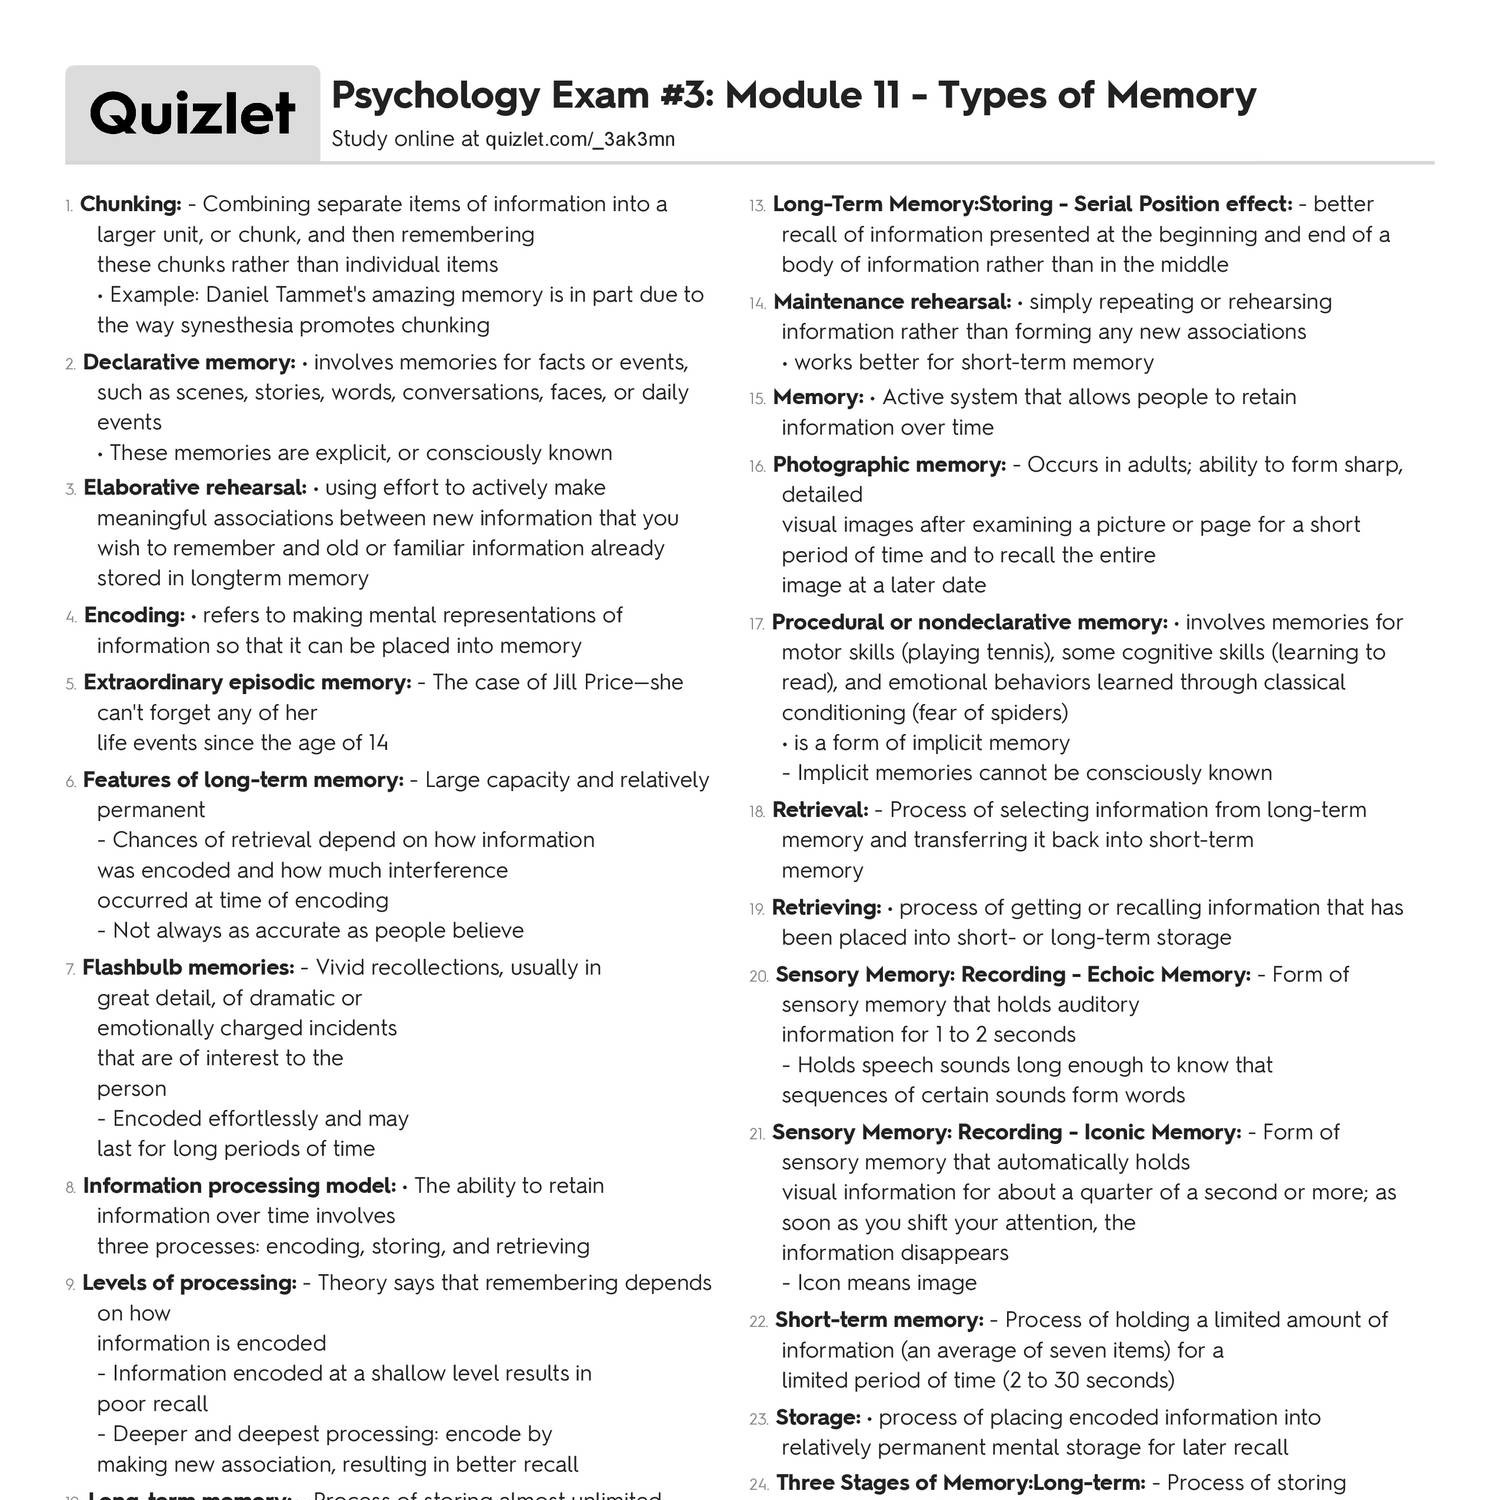 research on memory finds that quizlet